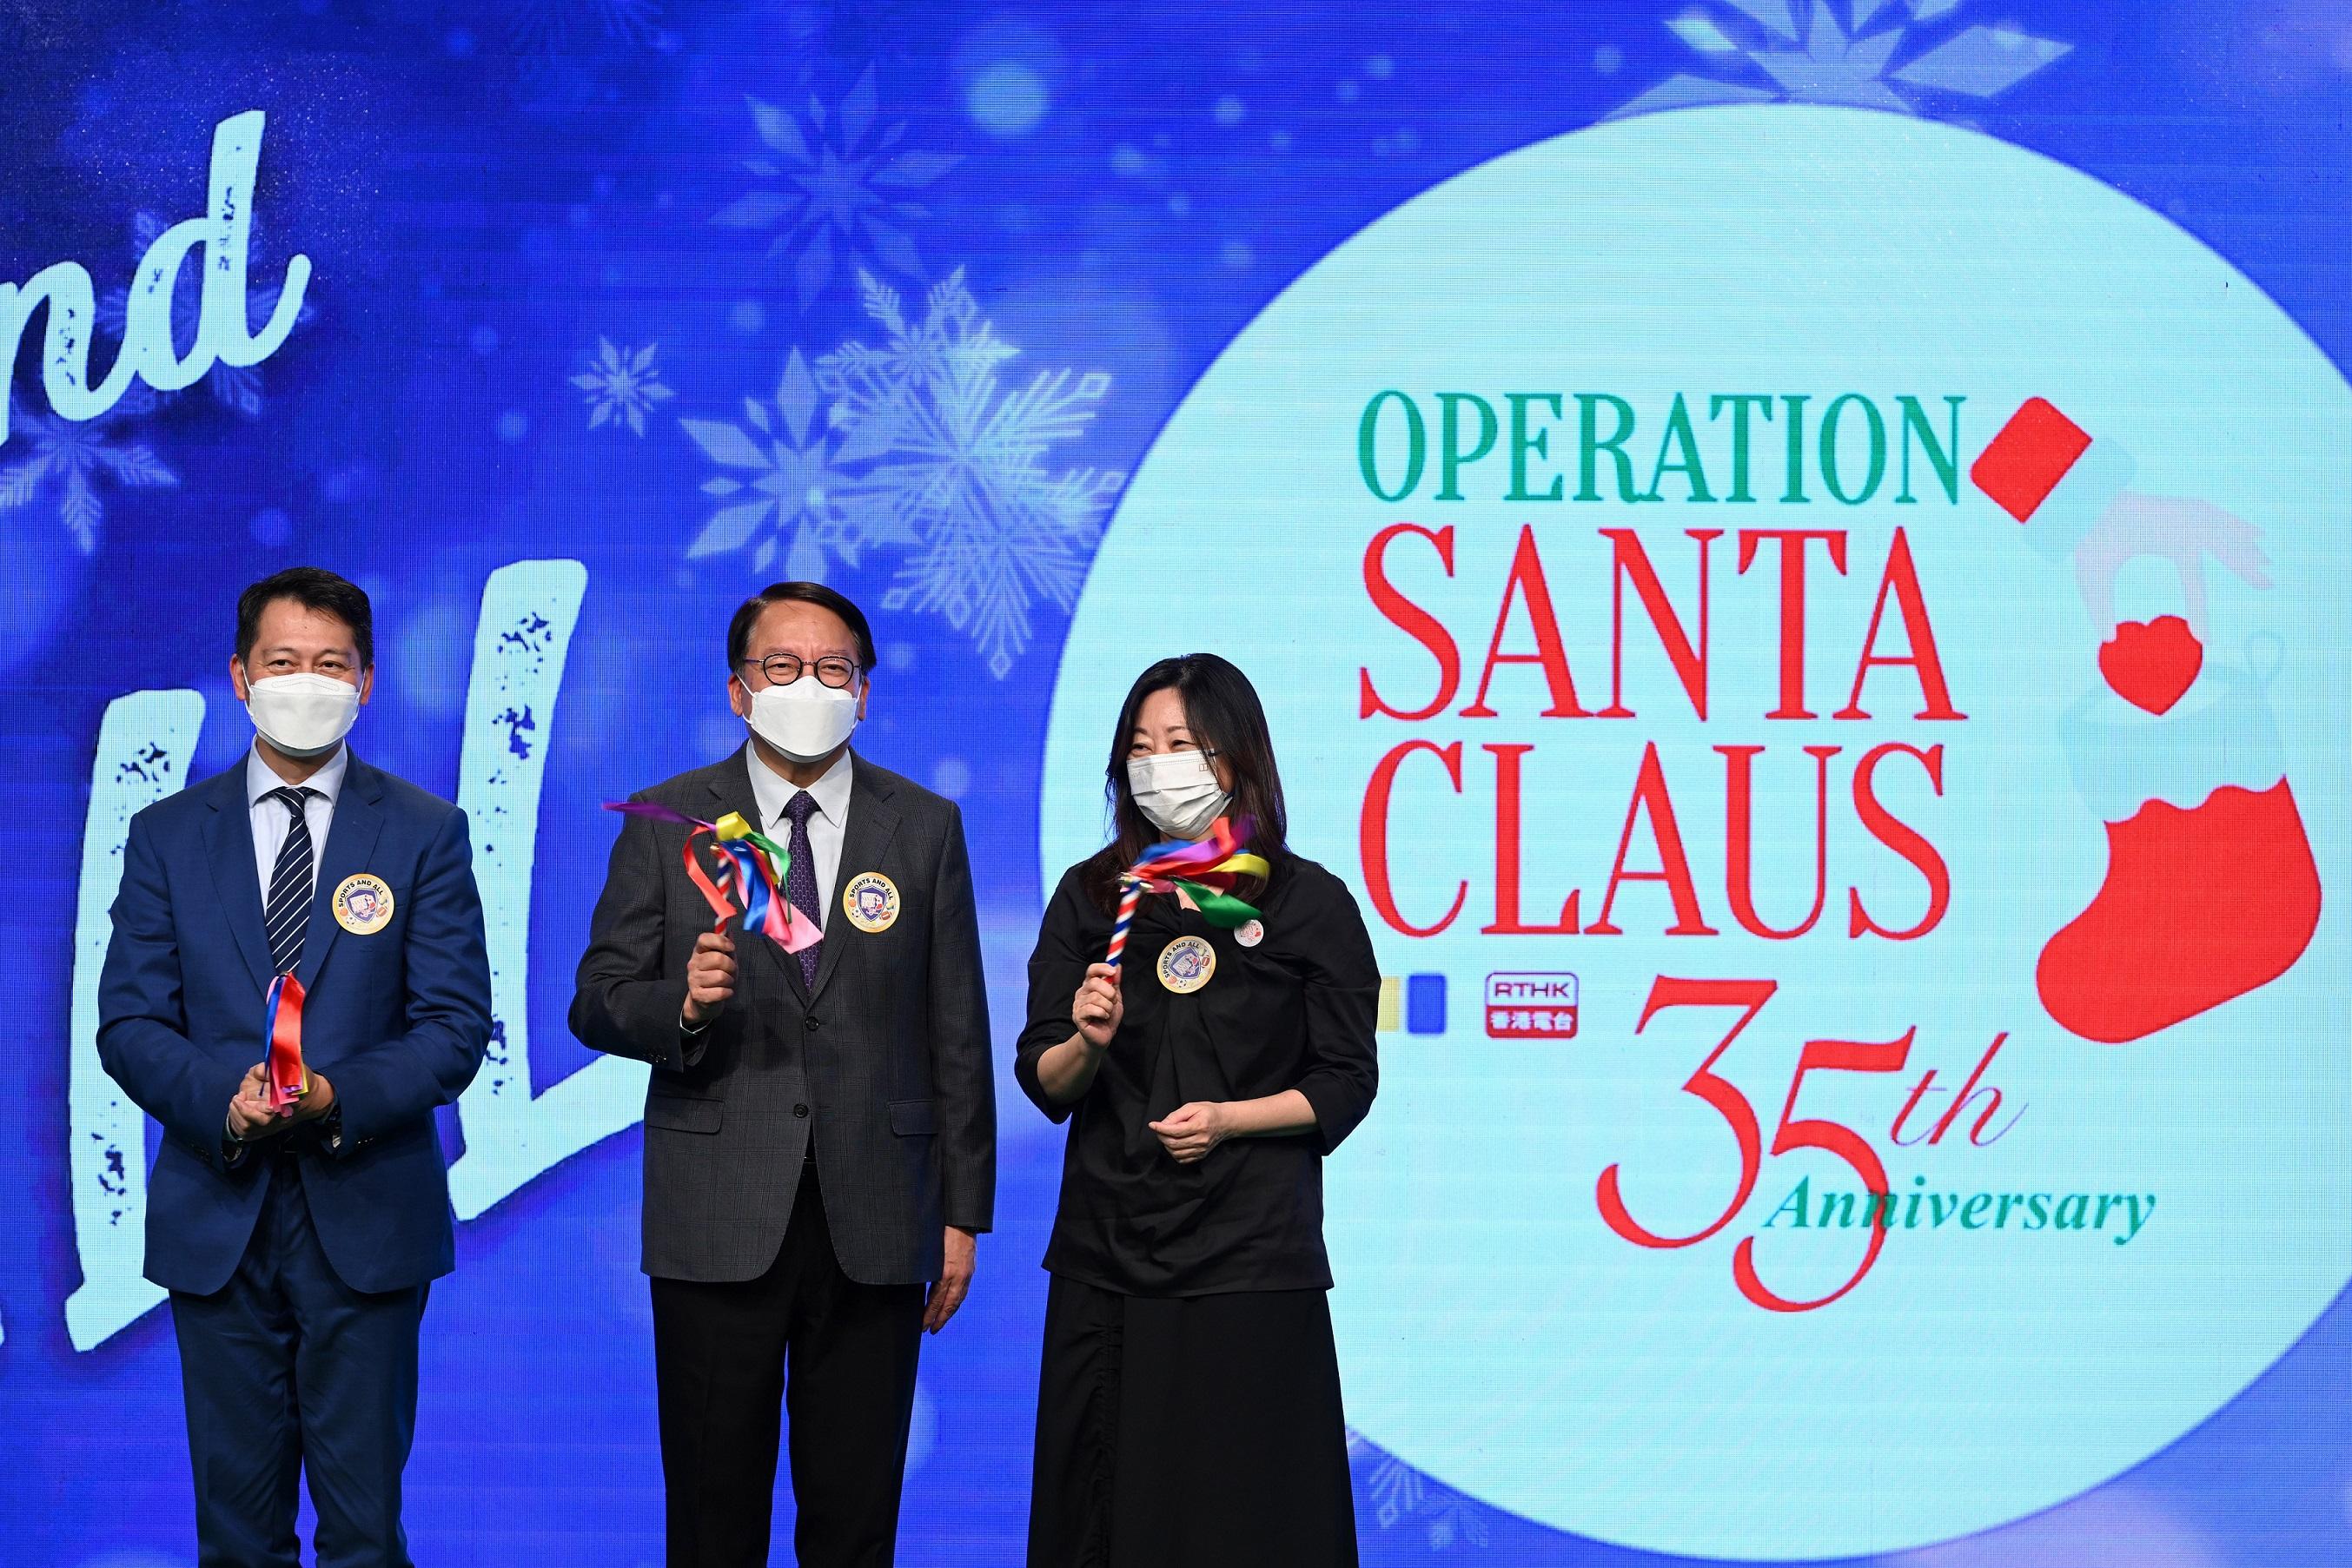 The Chief Secretary for Administration, Mr Chan Kwok-ki, attended the Operation Santa Claus 35th anniversary celebration at Broadcasting House of Radio Television Hong Kong this evening (November 17). Photo shows Mr Chan (centre); the Director of Broadcasting, Mr Eddie Cheung (left); and the Director of Corporate Social Responsibility of South China Morning Post, Ms Mabel Sieh (right), at the event.